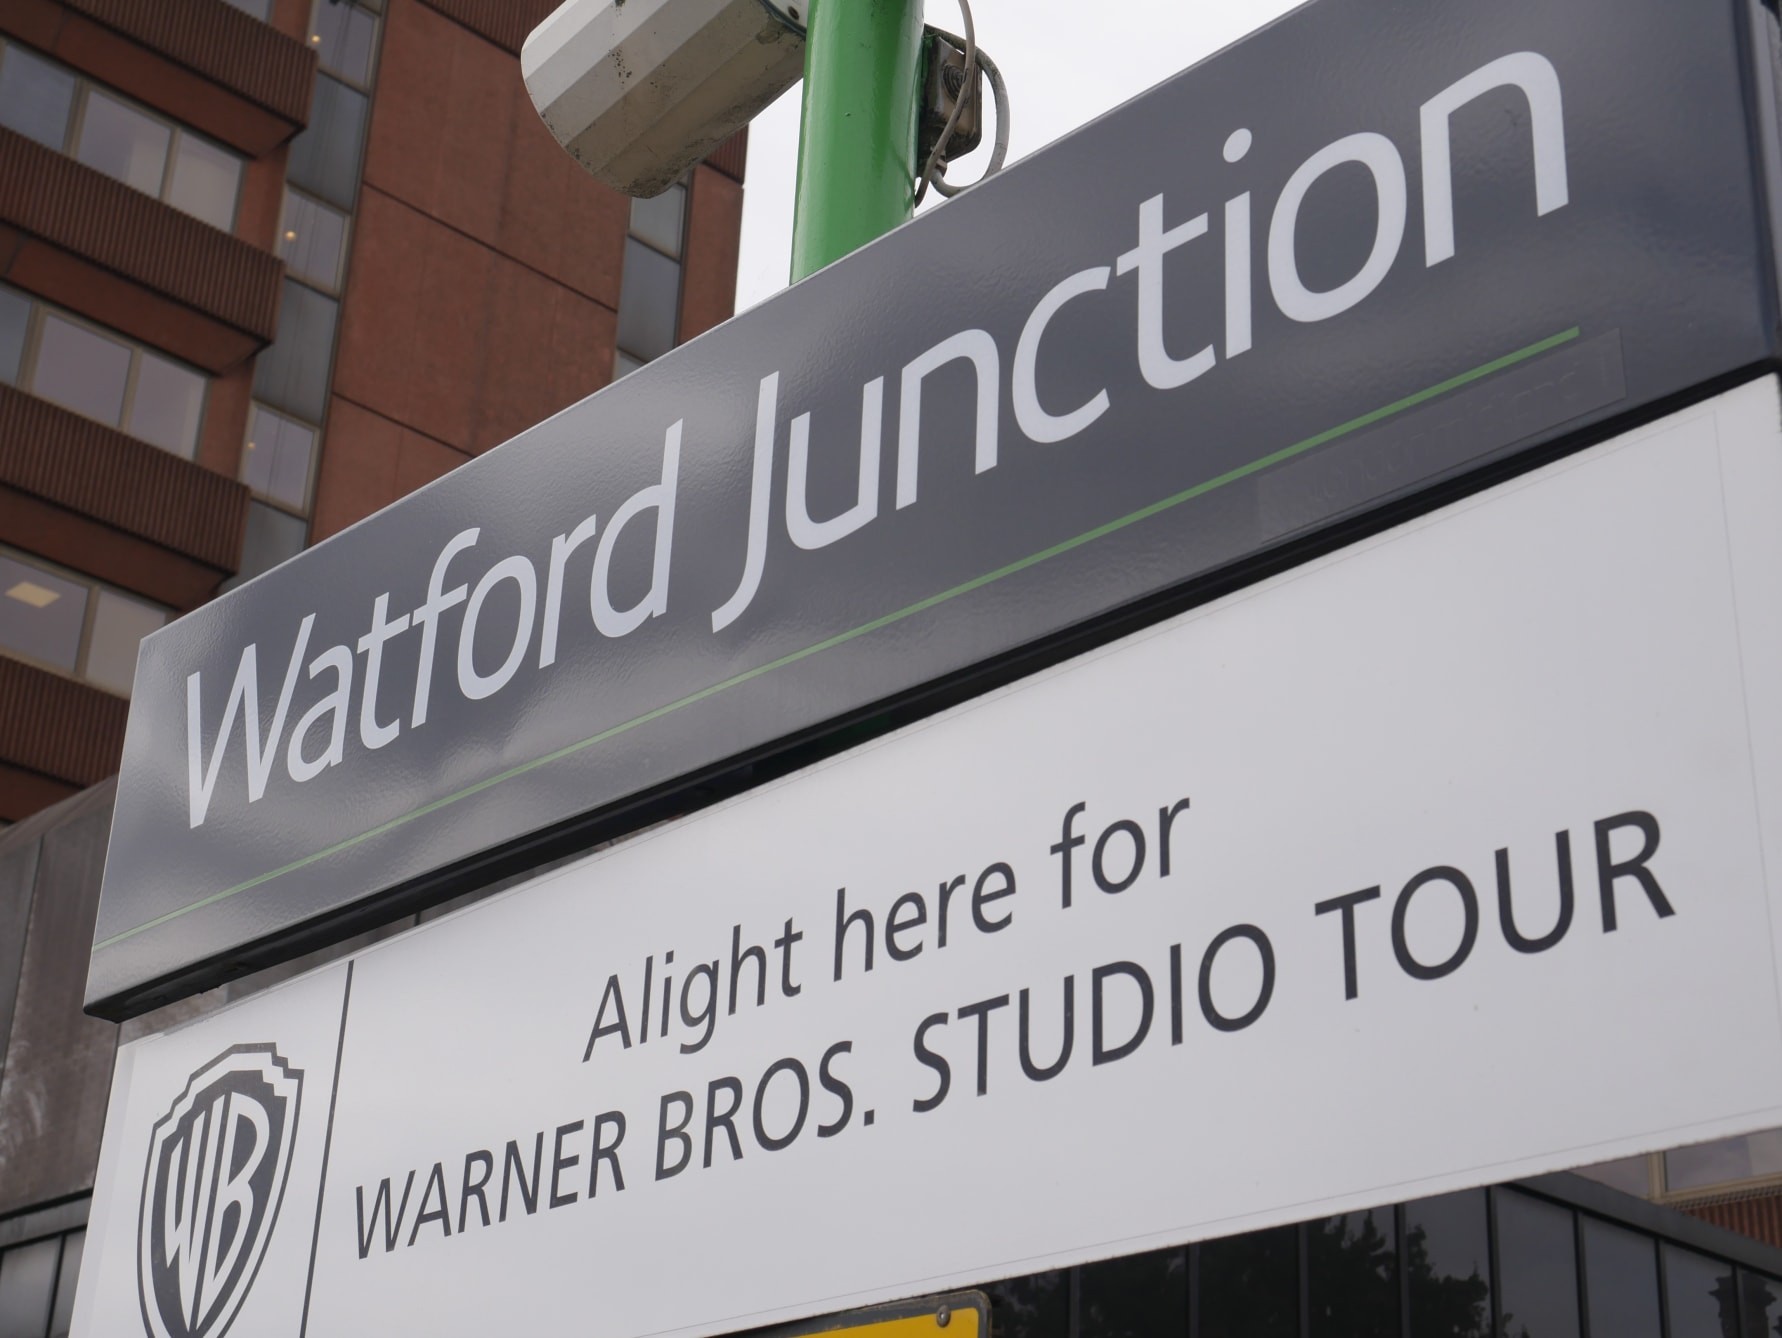 Passengers advised of major works to install new lifts at Watford Junction